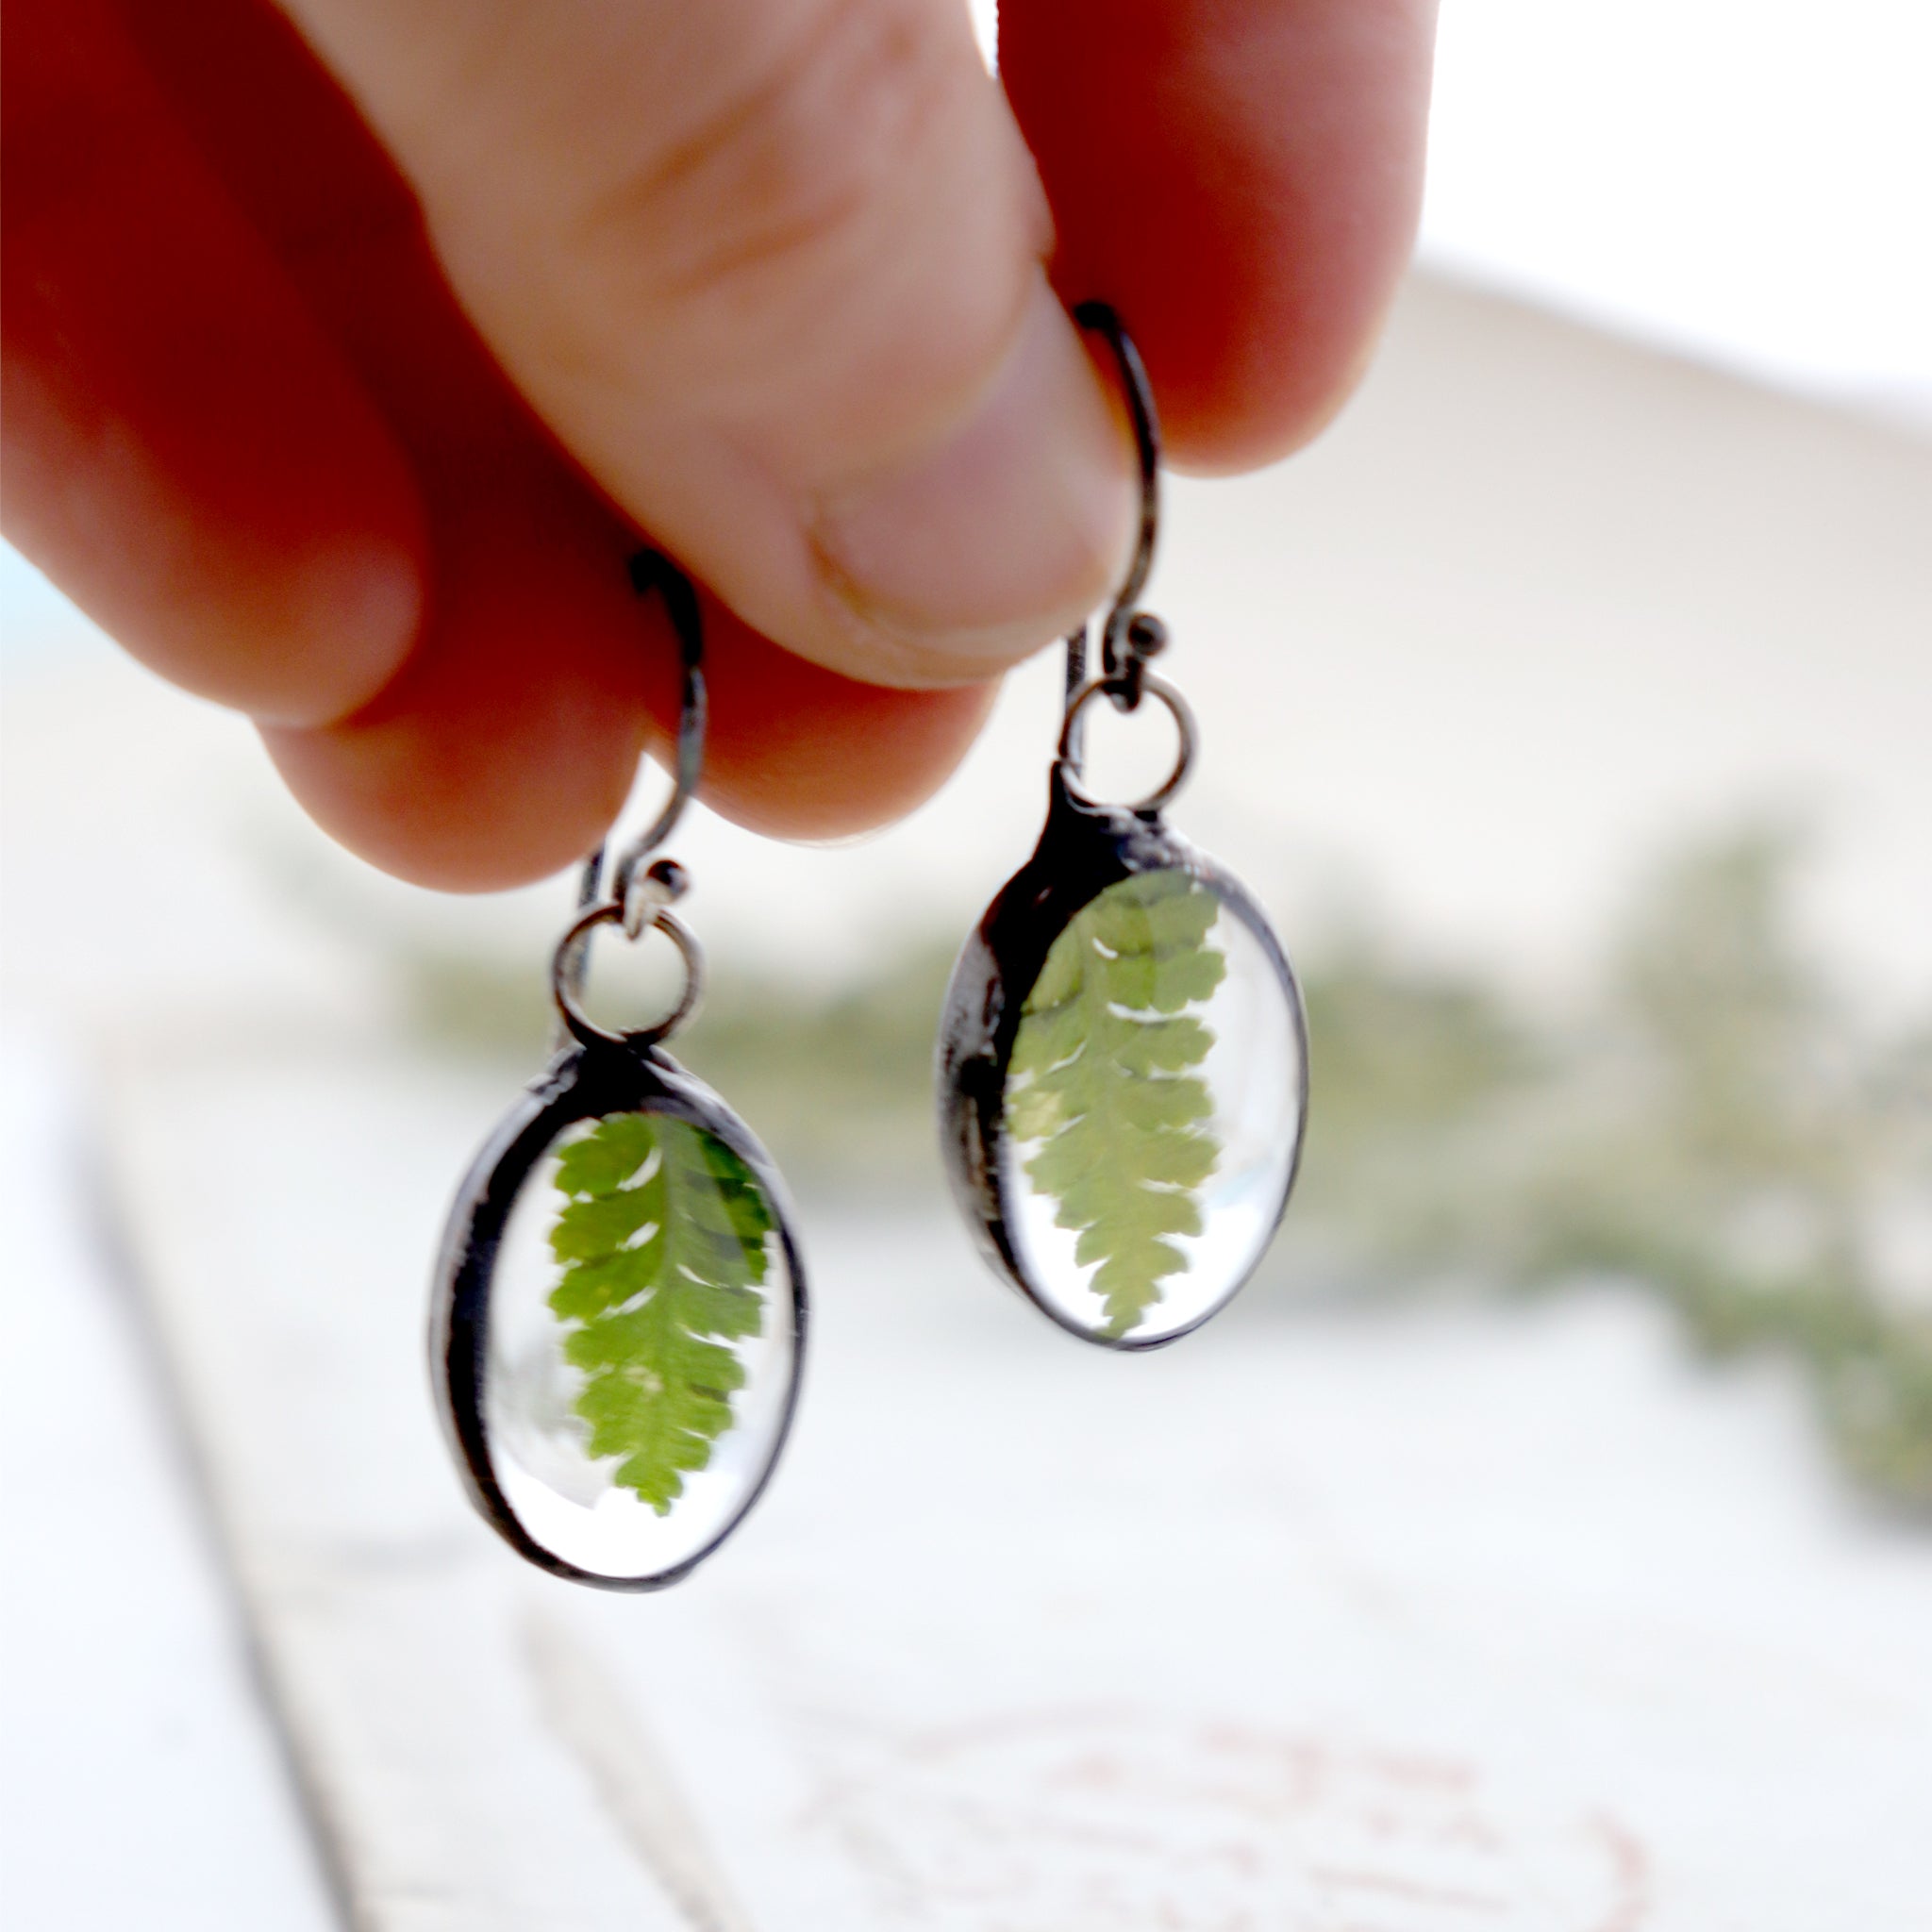 Earrings with real fern being hold in hand